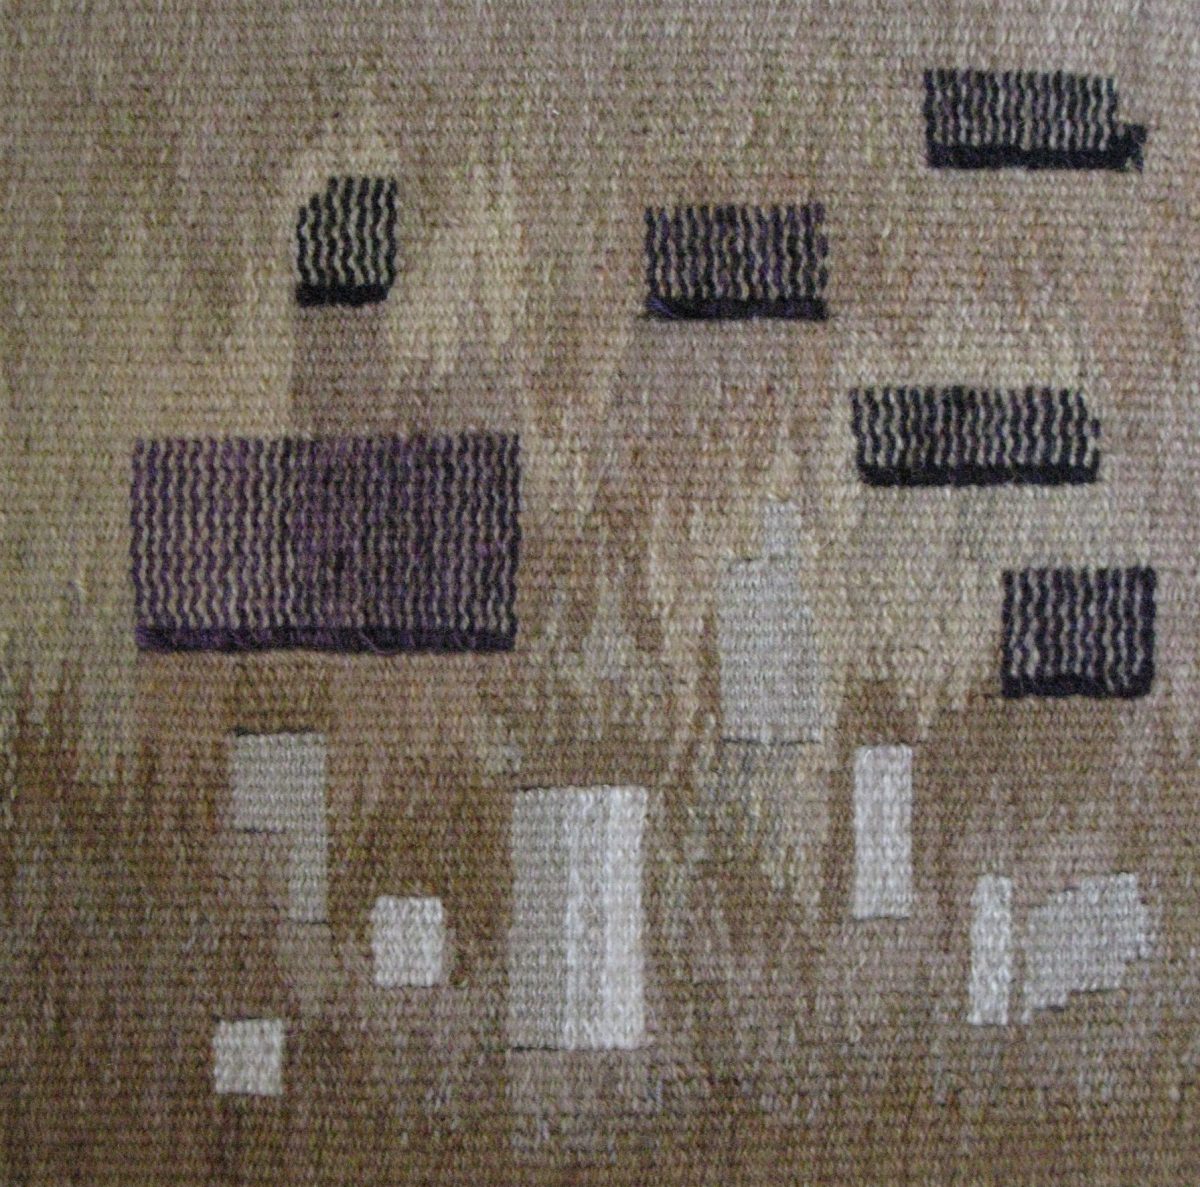 woven tapestry with varying sizes of blocks